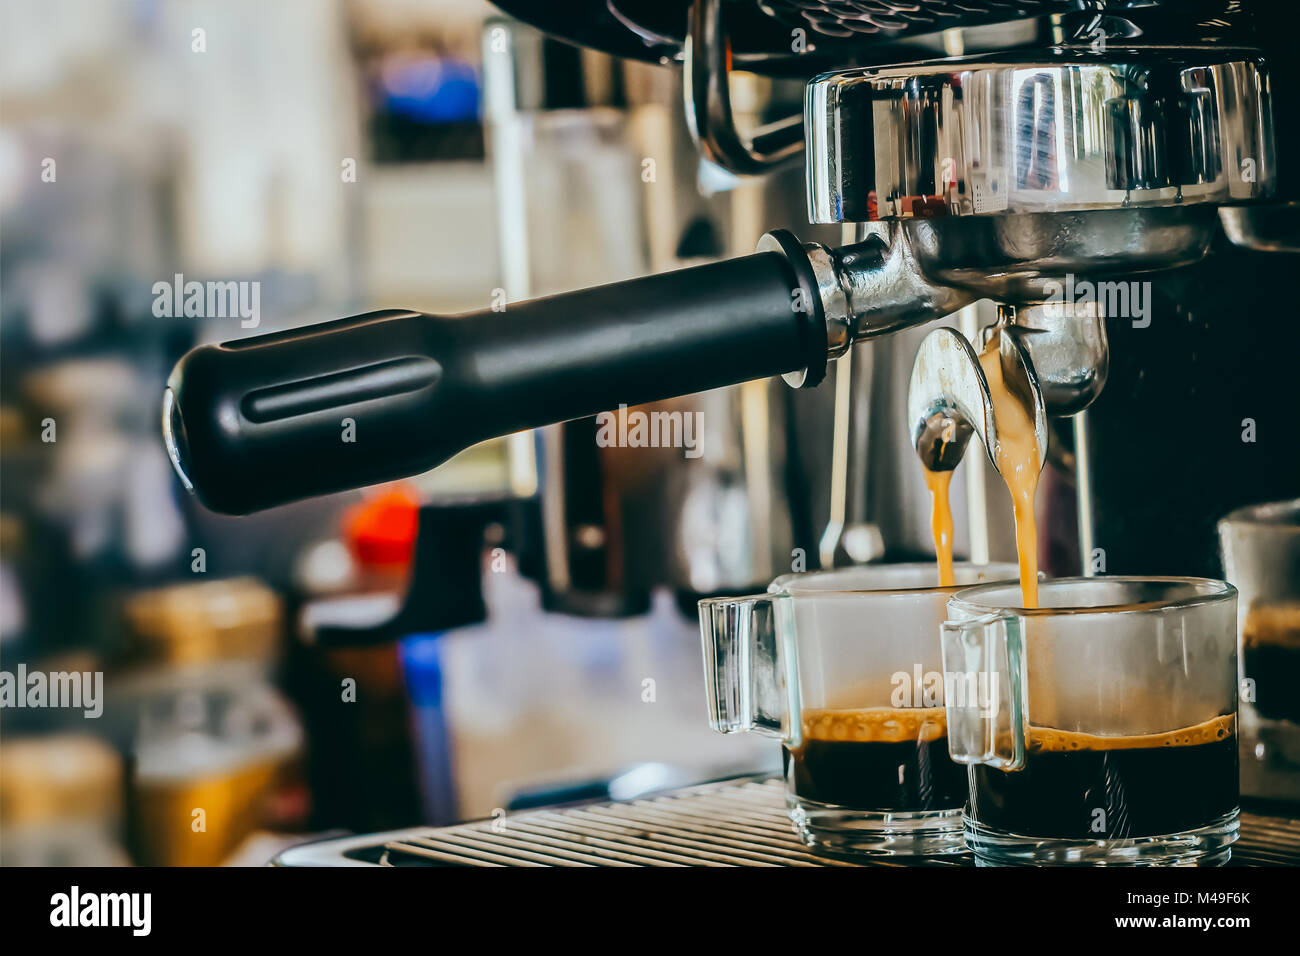 Espresso Machine Making Two Cups Of Coffee Stock Photo - Download Image Now  - Automatic, Bar Counter, Barista - iStock